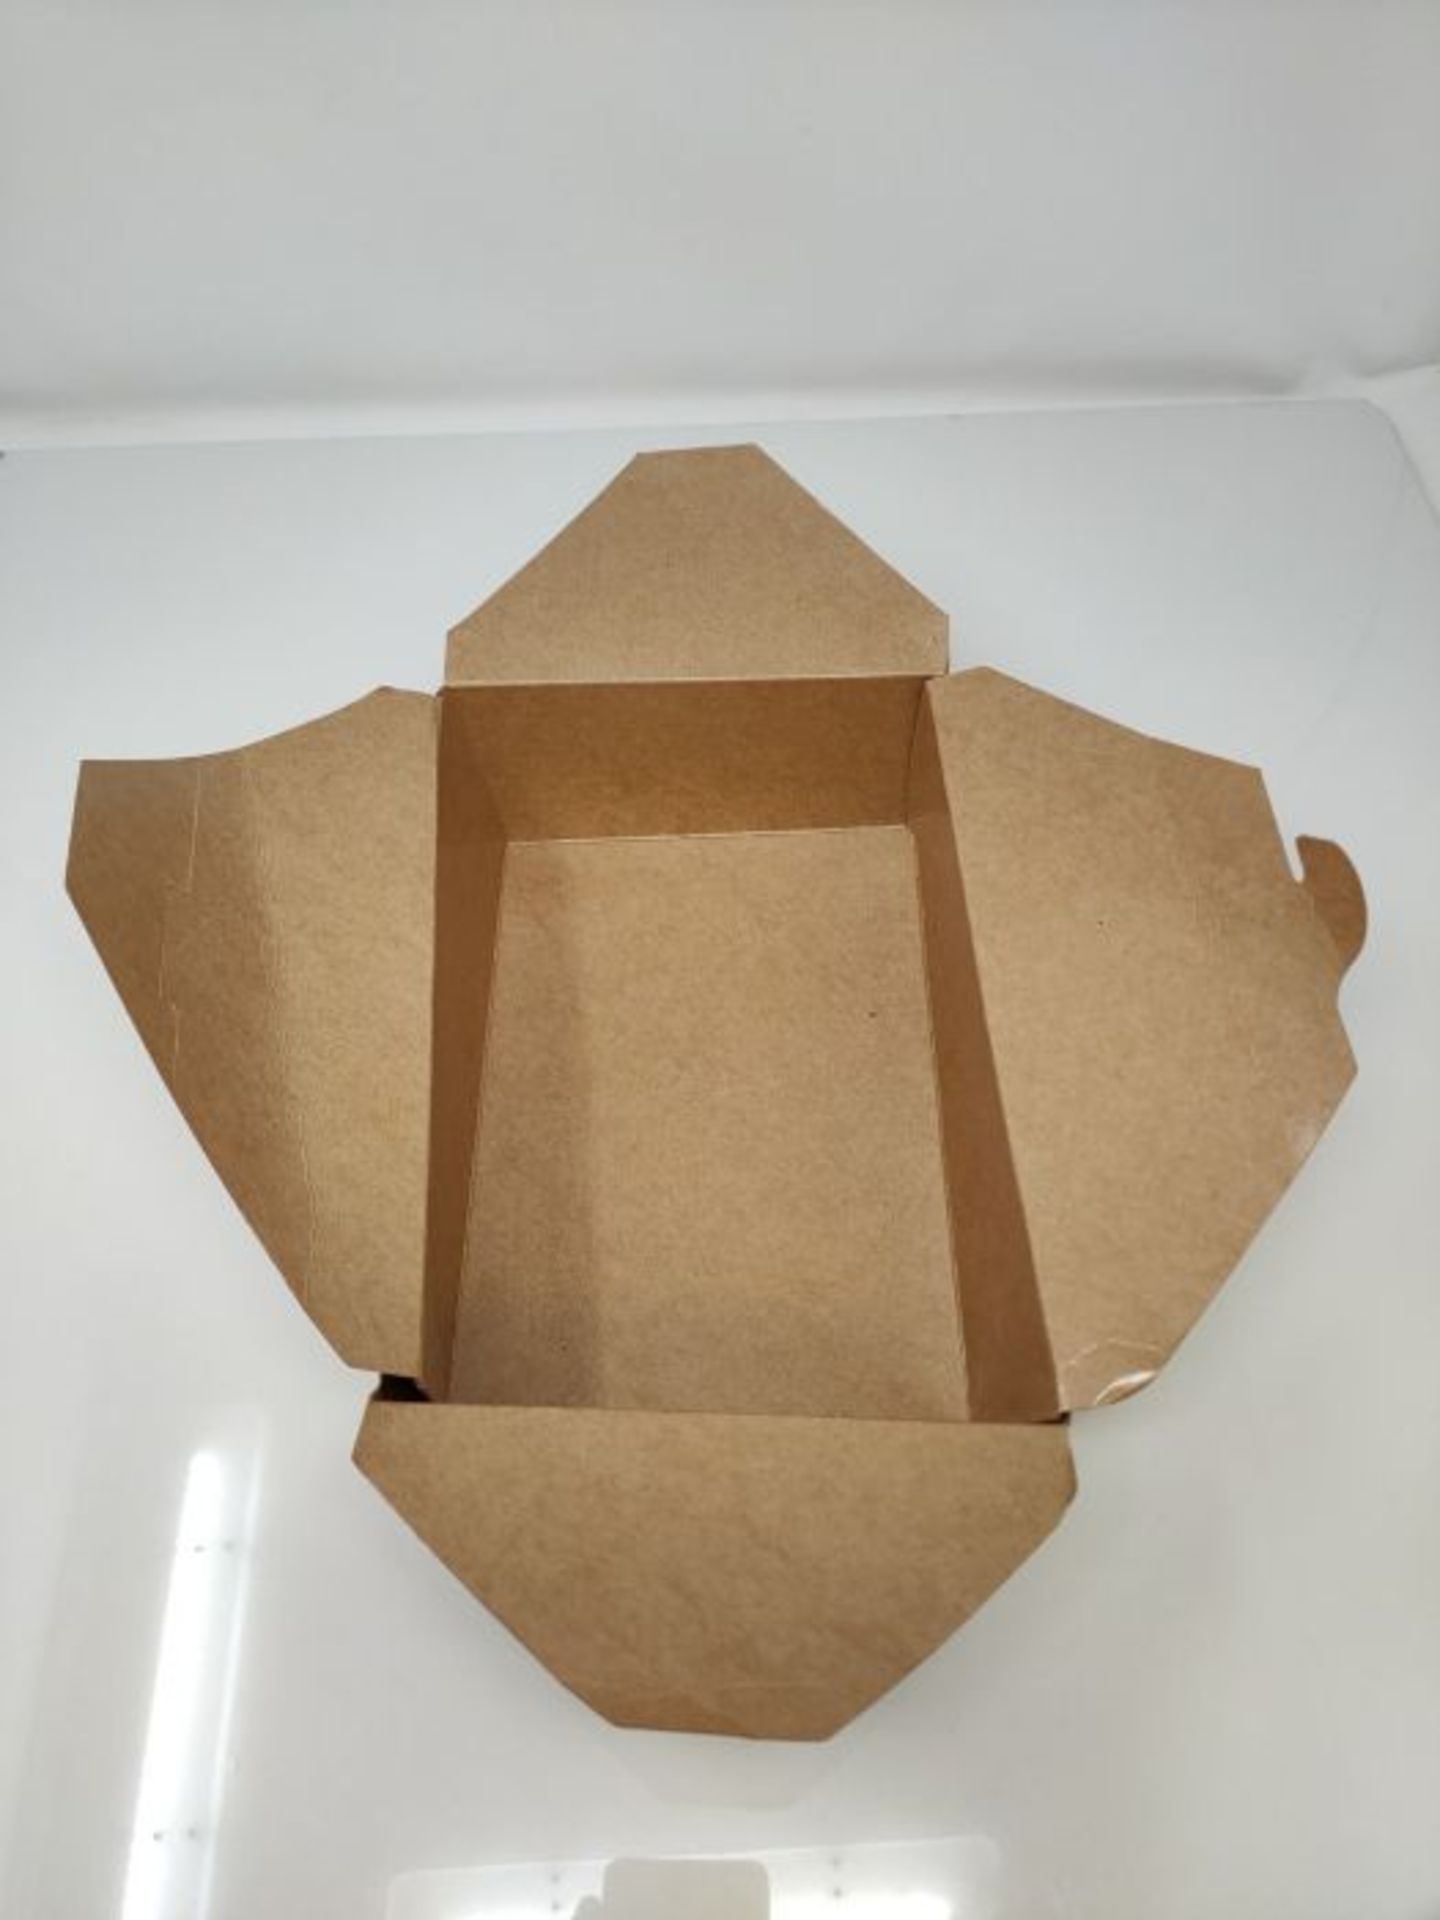 Disposable Kraft Paper Box To Go Containers - 25 Biodegradable Hot and Cold Take Out F - Image 3 of 3